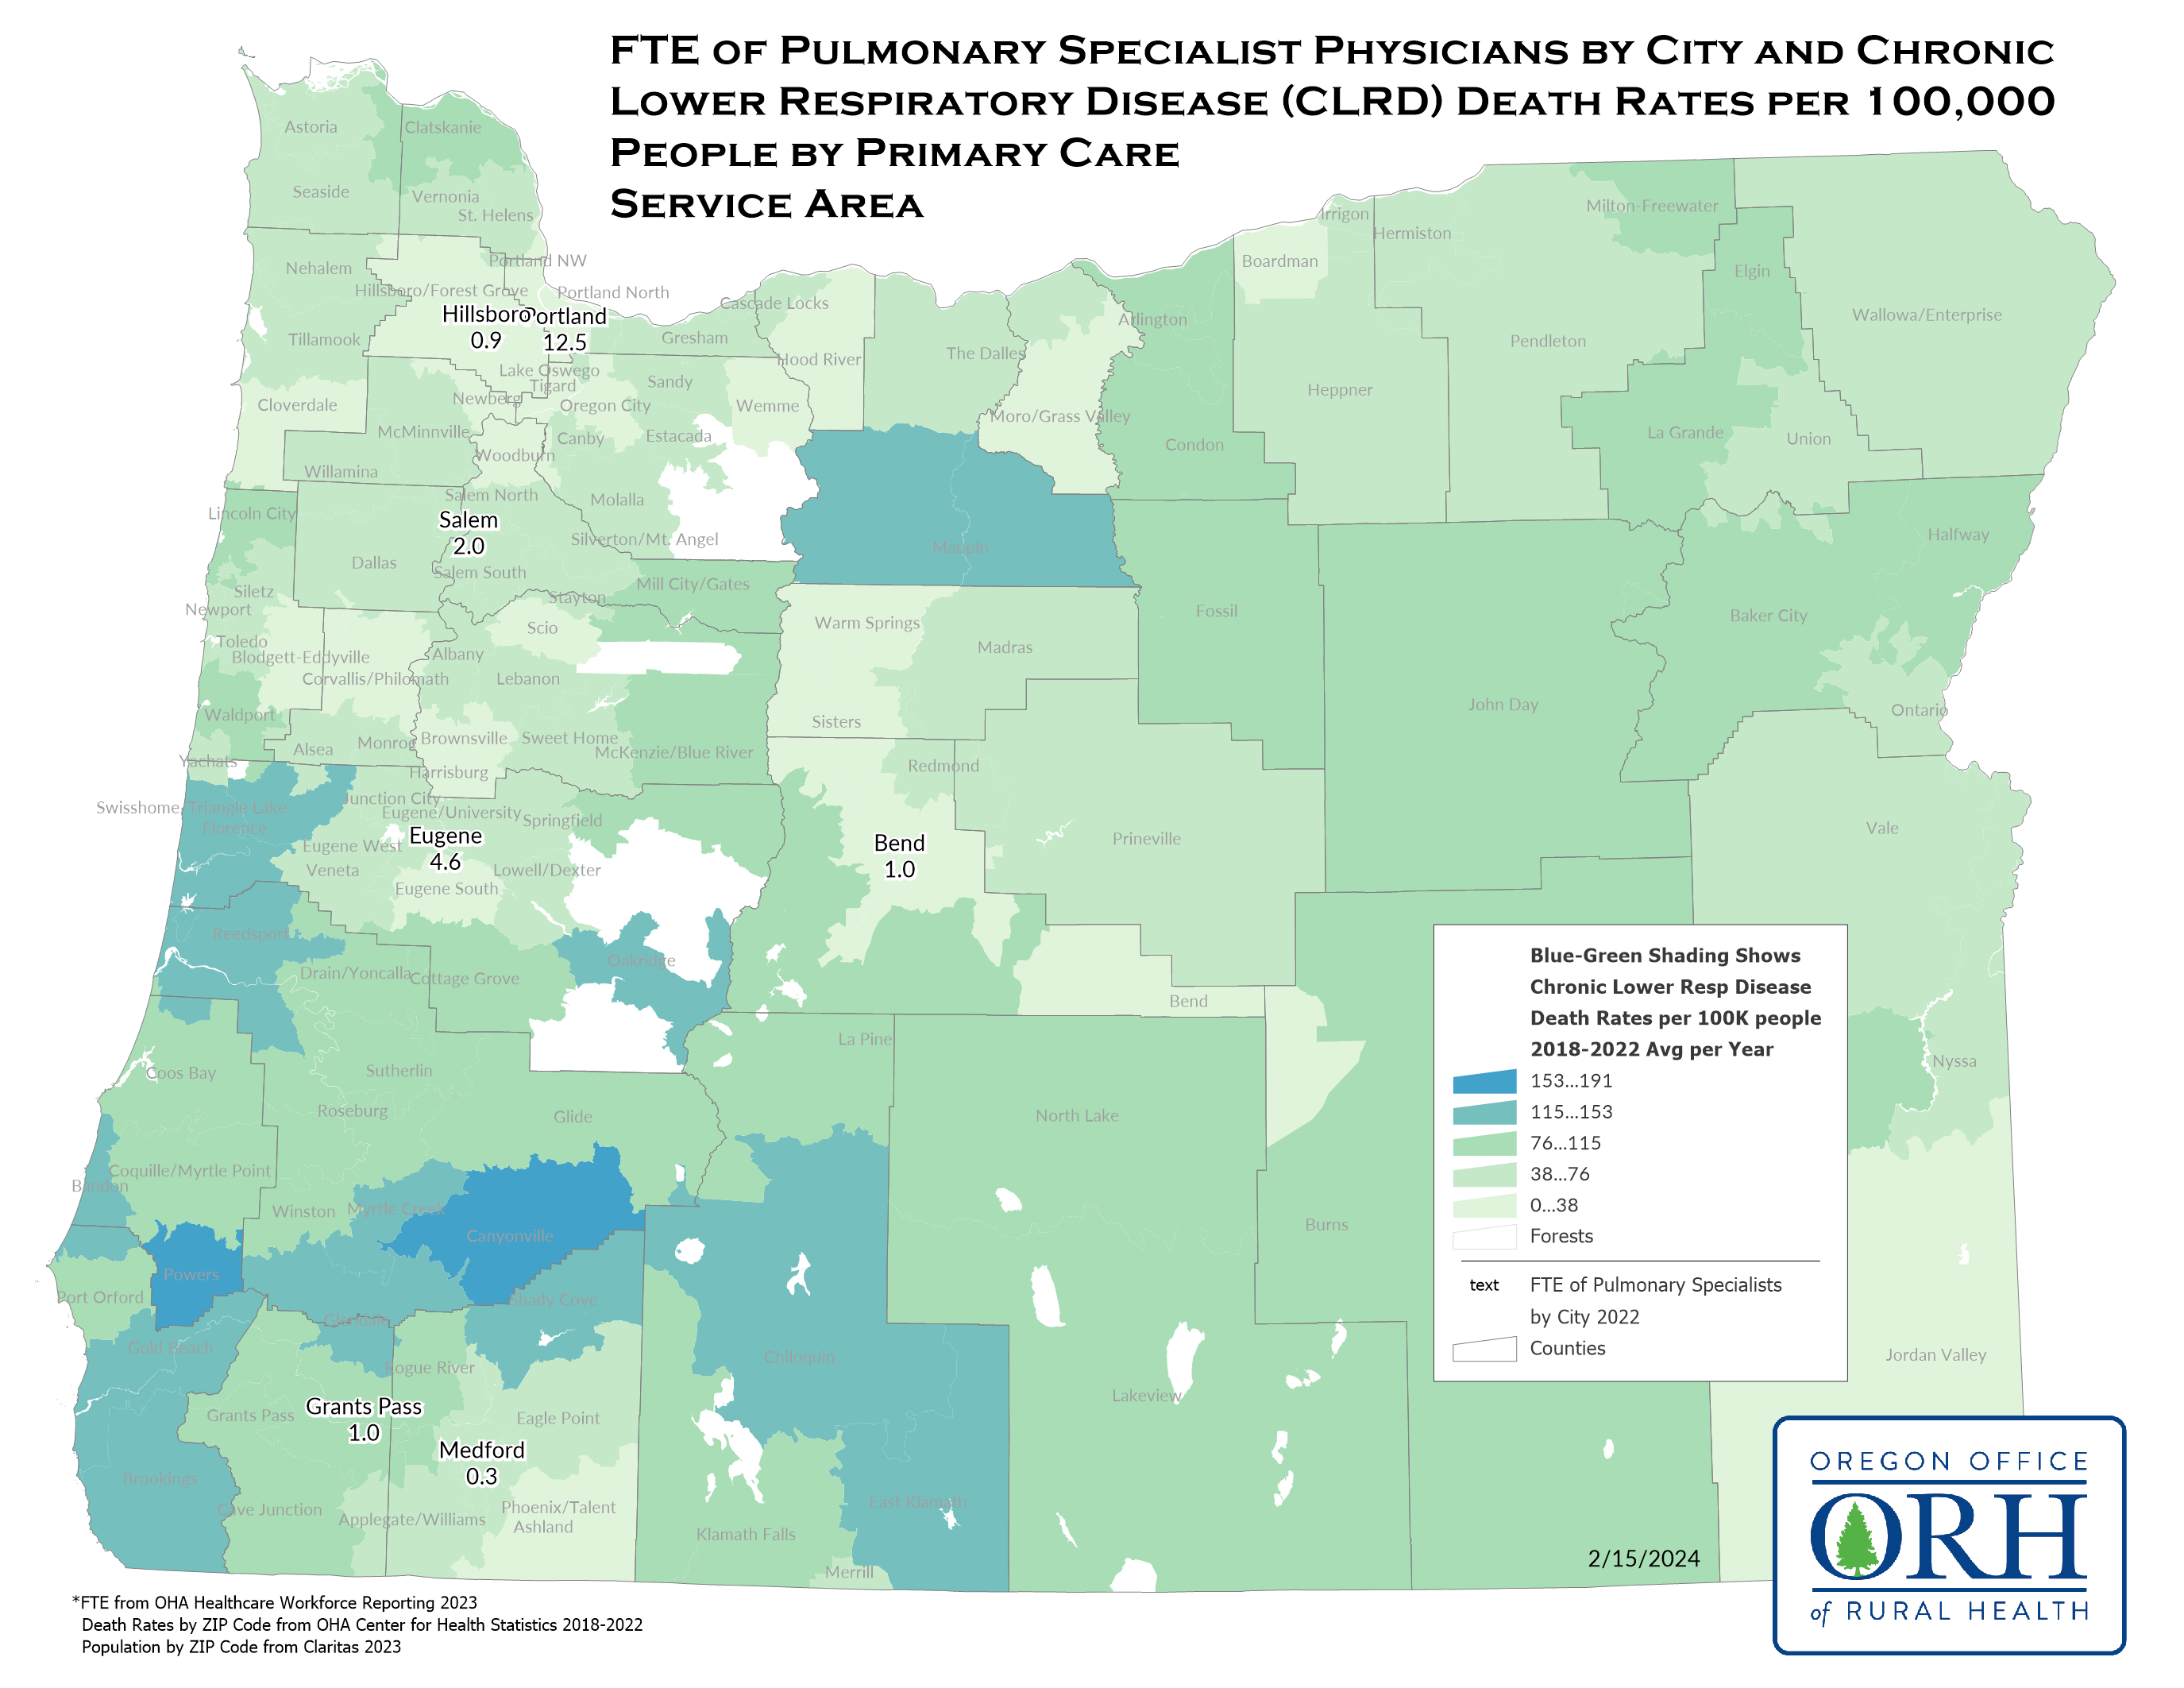 FTE of Pulmonary Specialist Physicians by City and CLRD Death Rates per 100,000 by Service Area